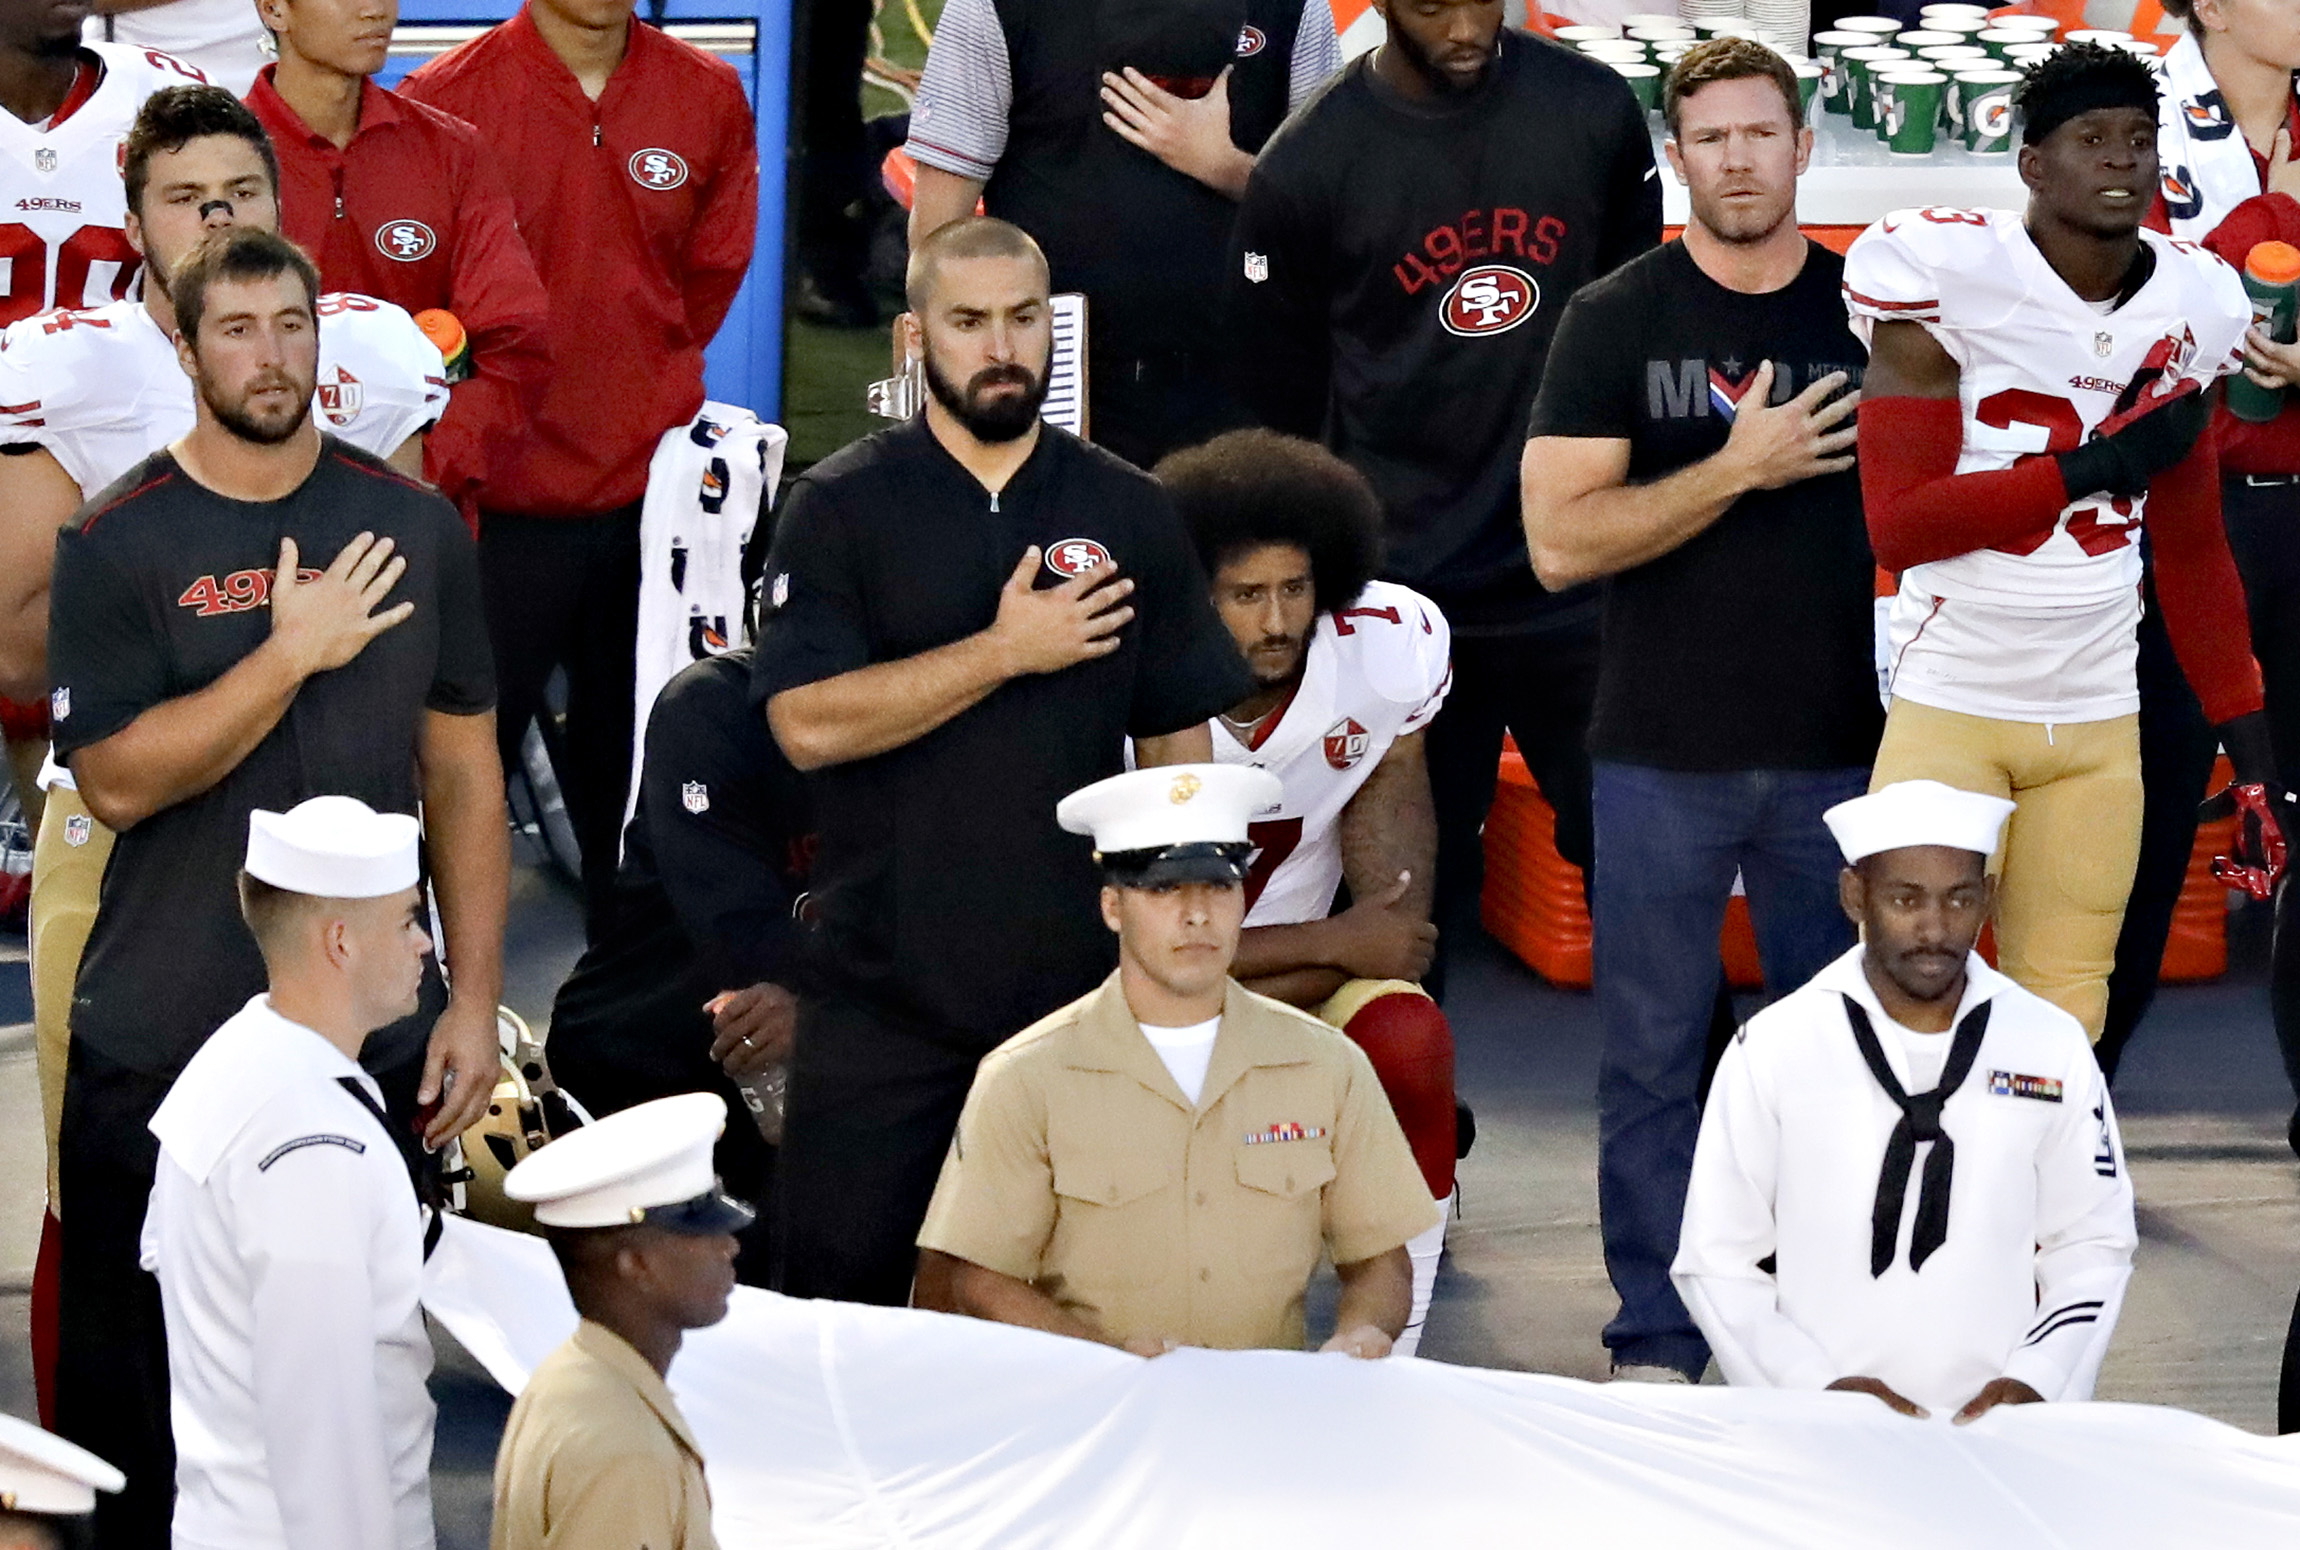 PHOTO: San Francisco 49ers quarterback Colin Kaepernick, center, kneels during the National Anthem before an NFL preseason football game against the San Diego Chargers in San Diego, Sept. 1, 2016.